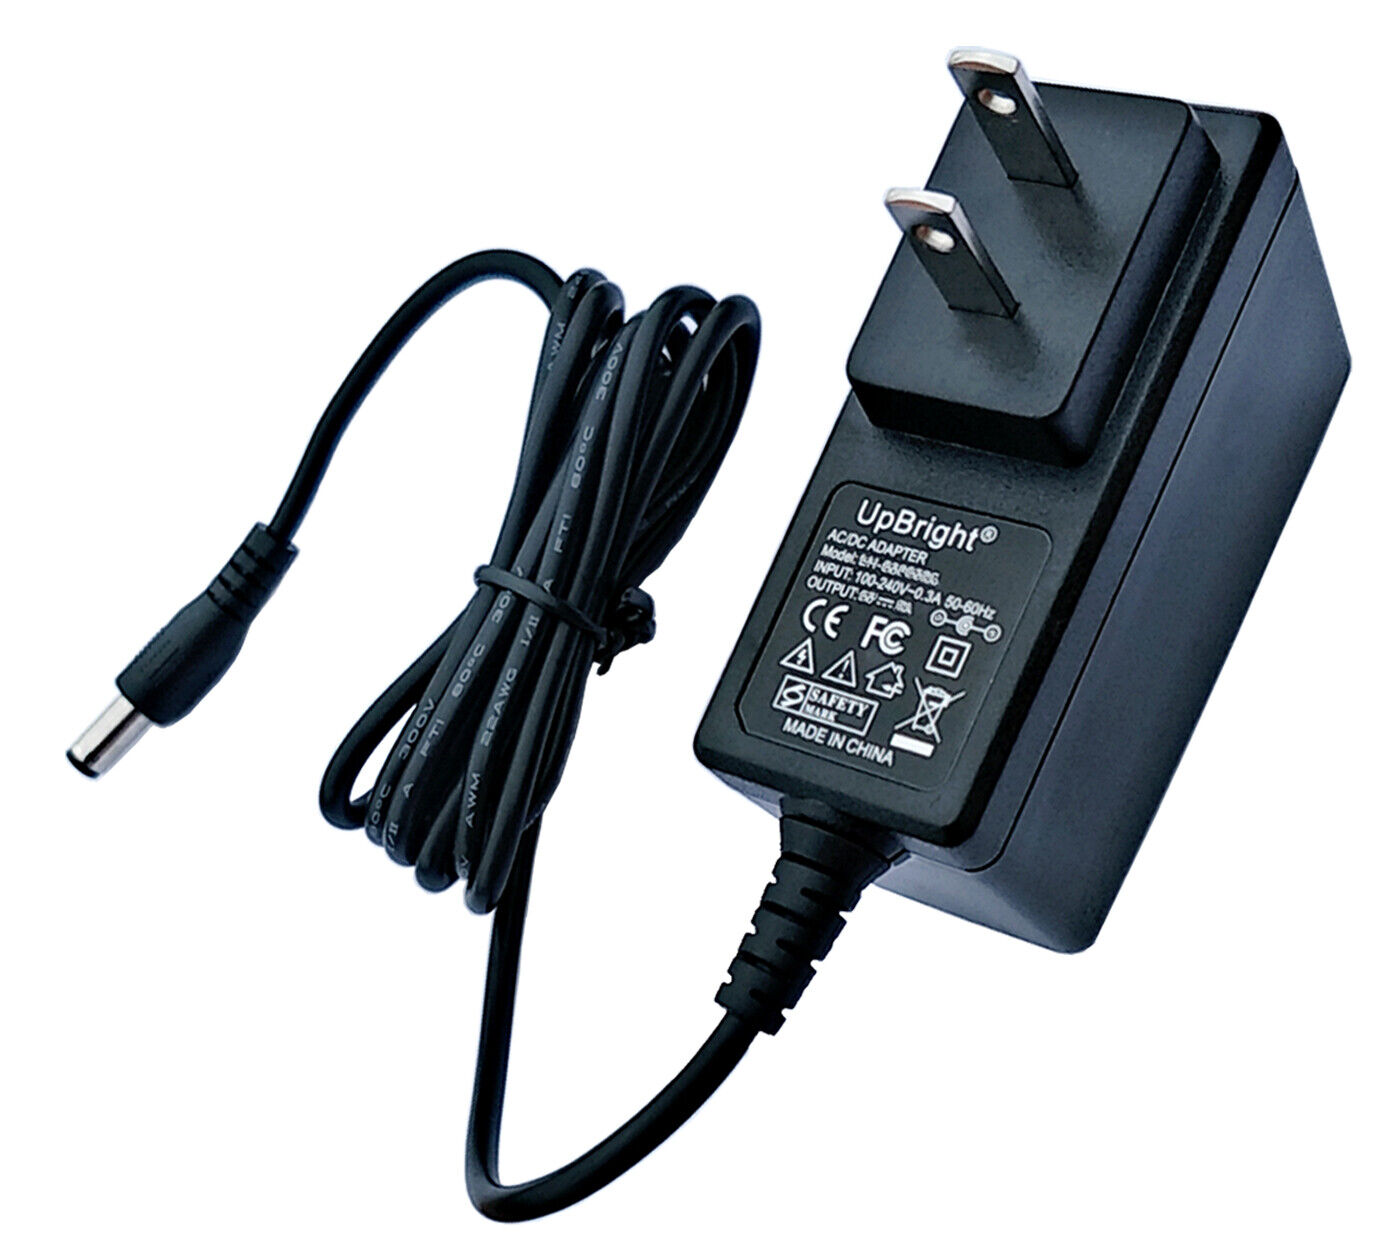 14V AC/DC Adapter For Konftel 200 300 Conference Phone Power Supply Cord Charger